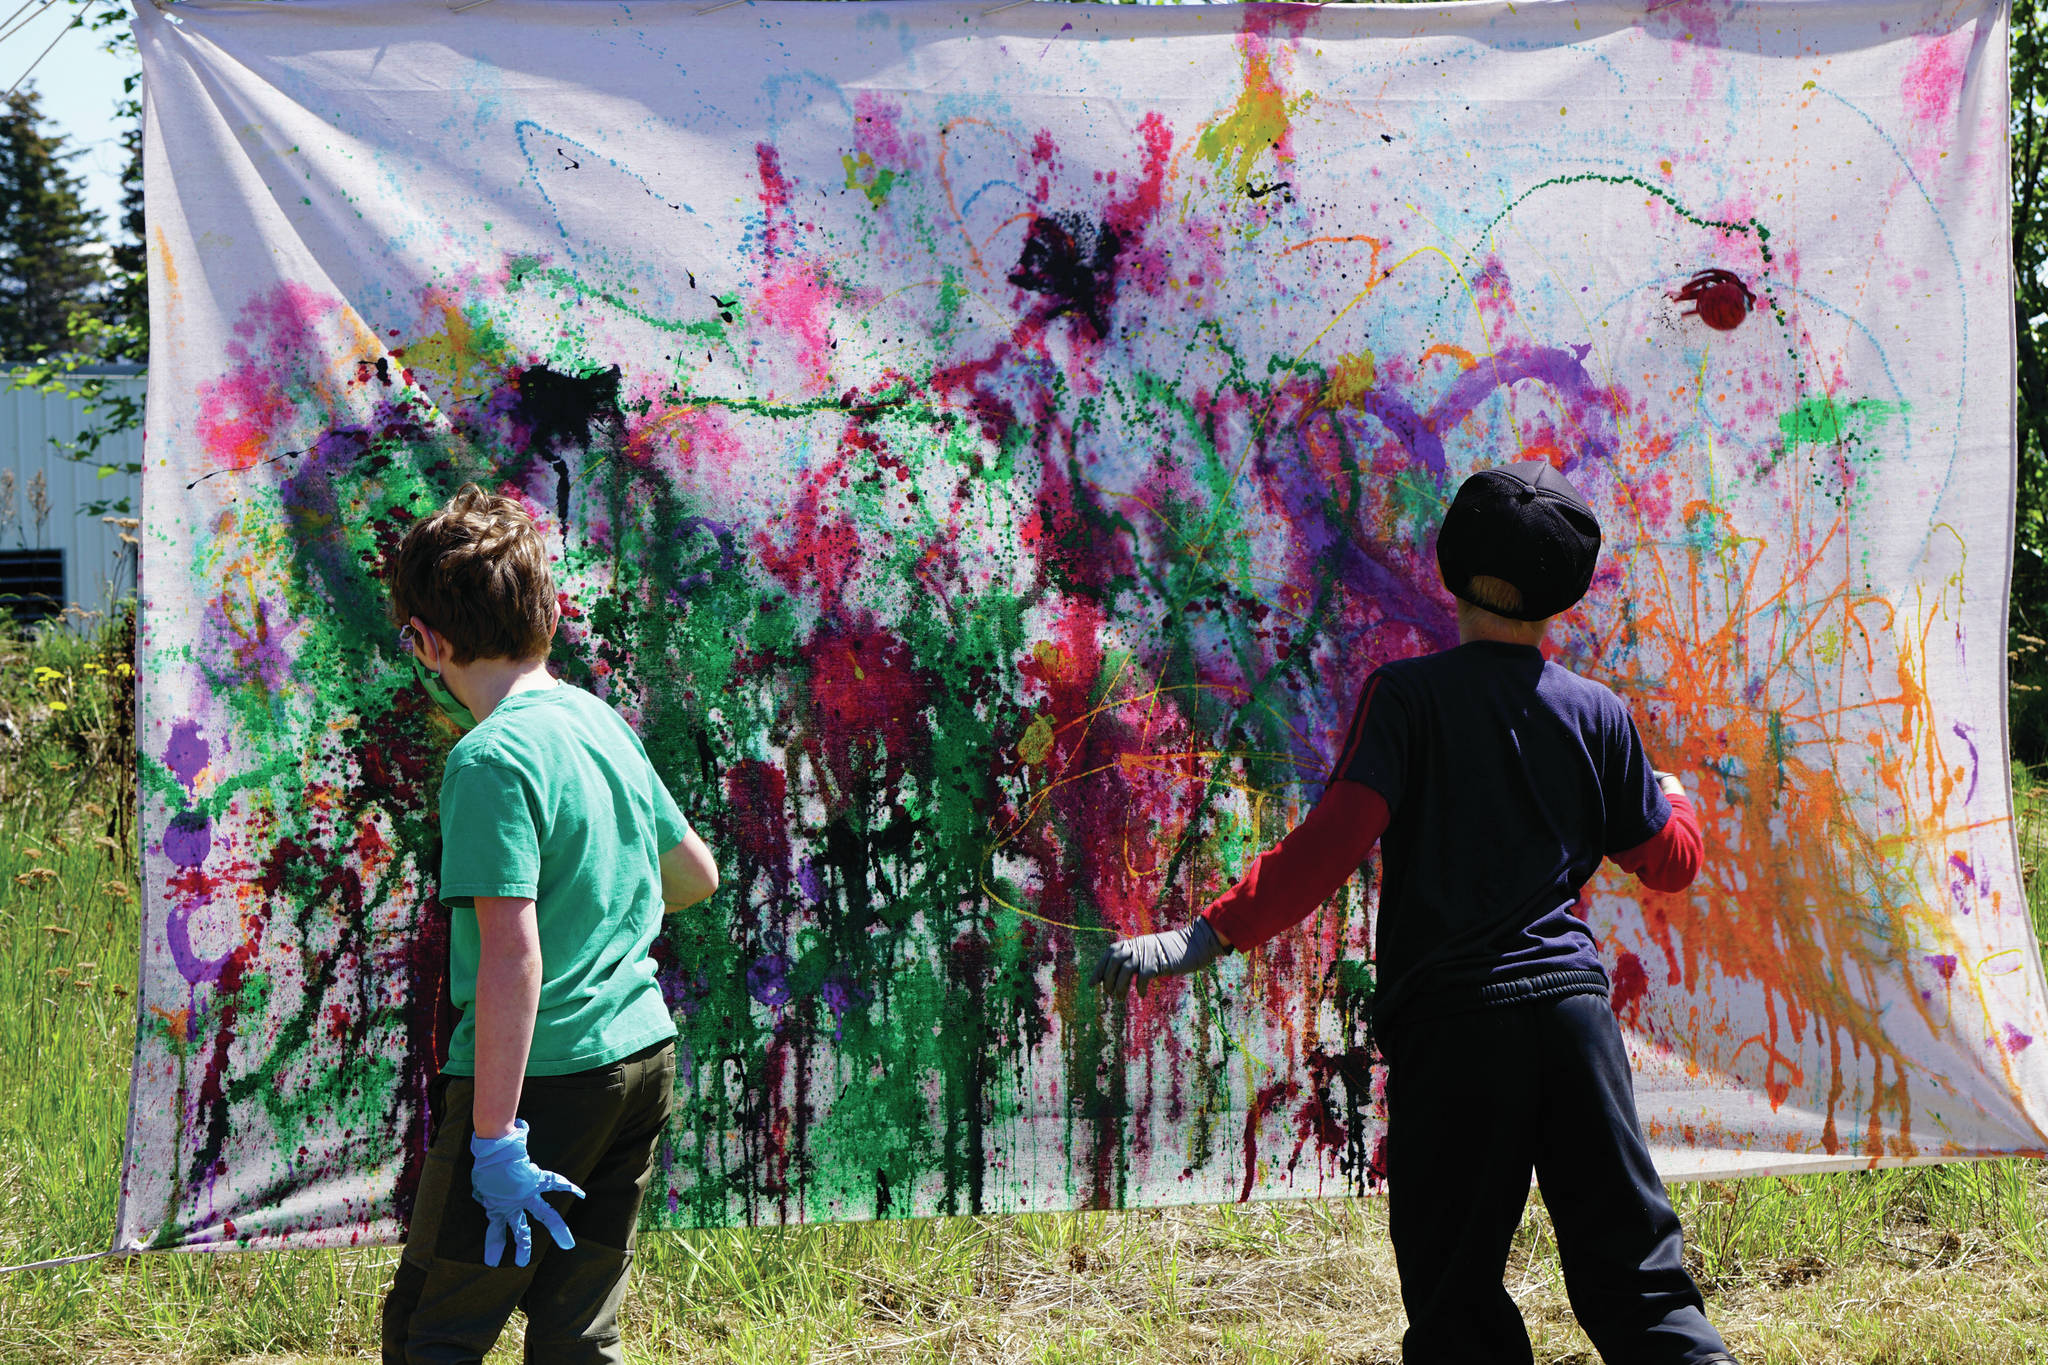 Children help create art with the projectile painting booth on Saturday, June 5, 2021, for Mary Epperson Day at the Homer Council on the Arts in Homer, Alaska. (Photo by Michael Armstrong/Homer News0